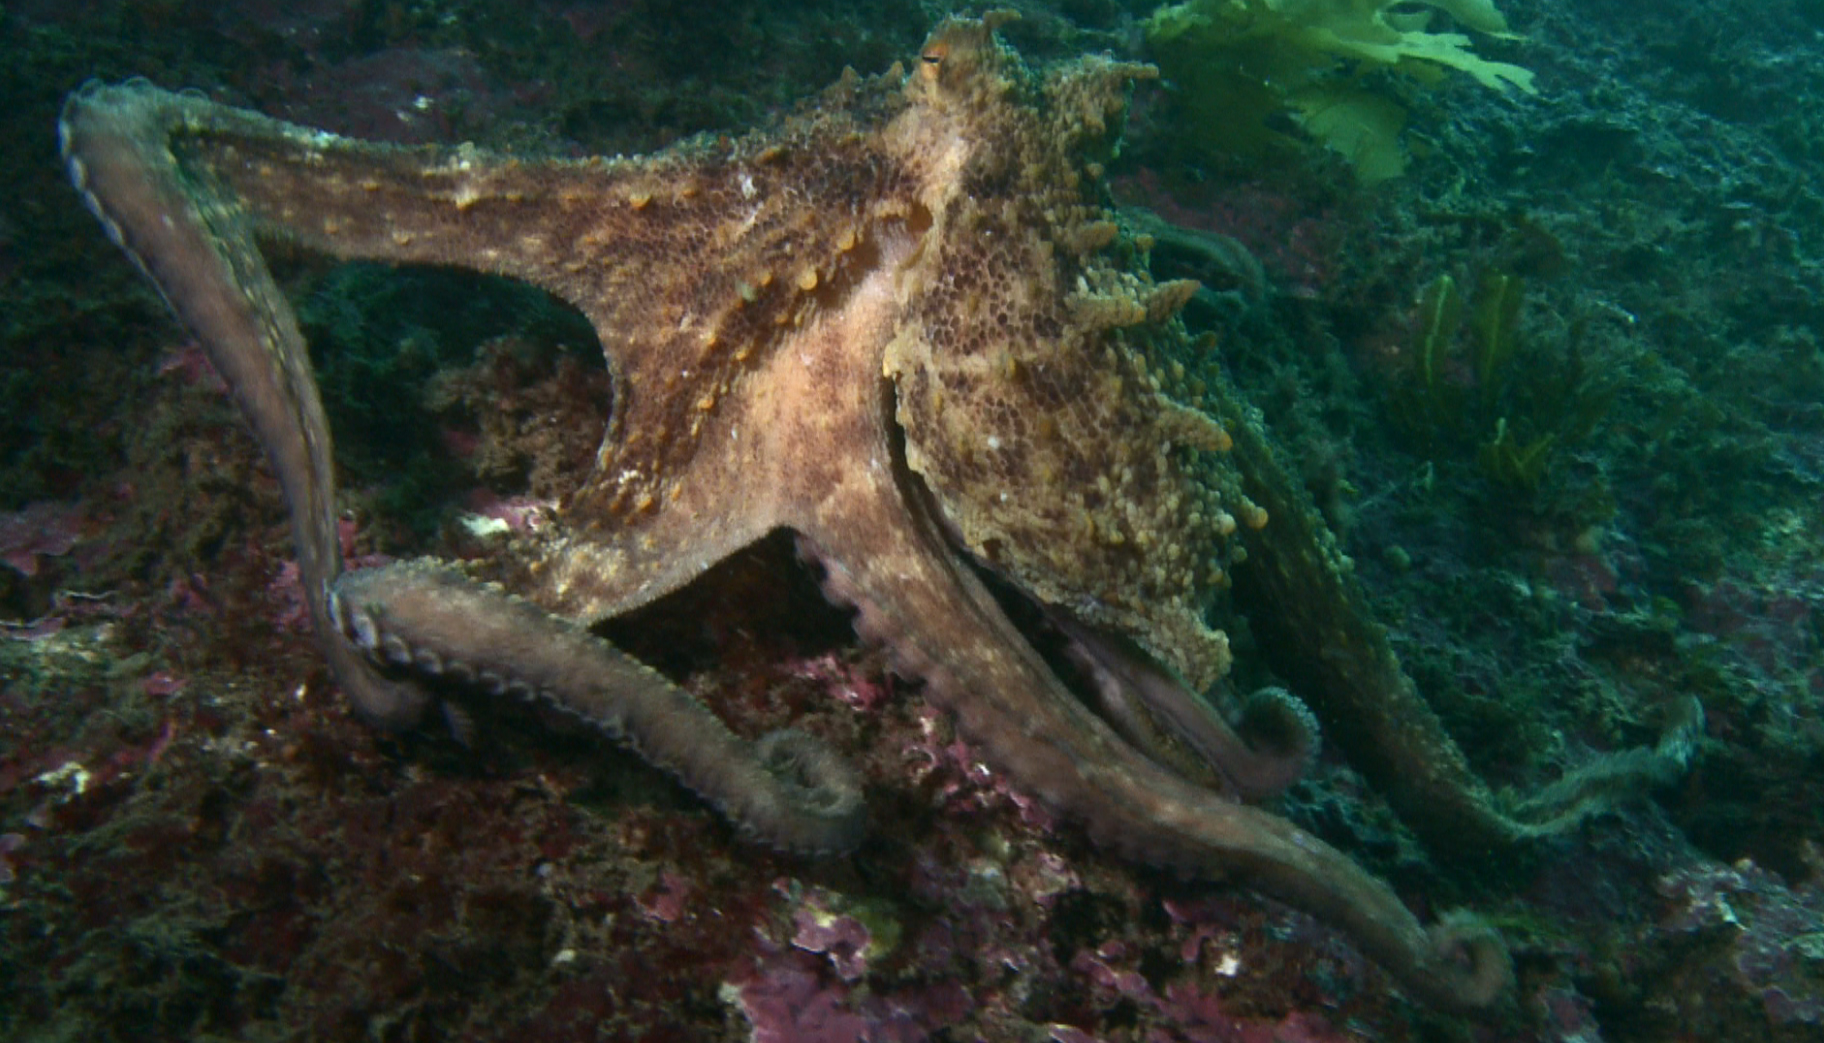 Octopus Picture by Buceo Virtual